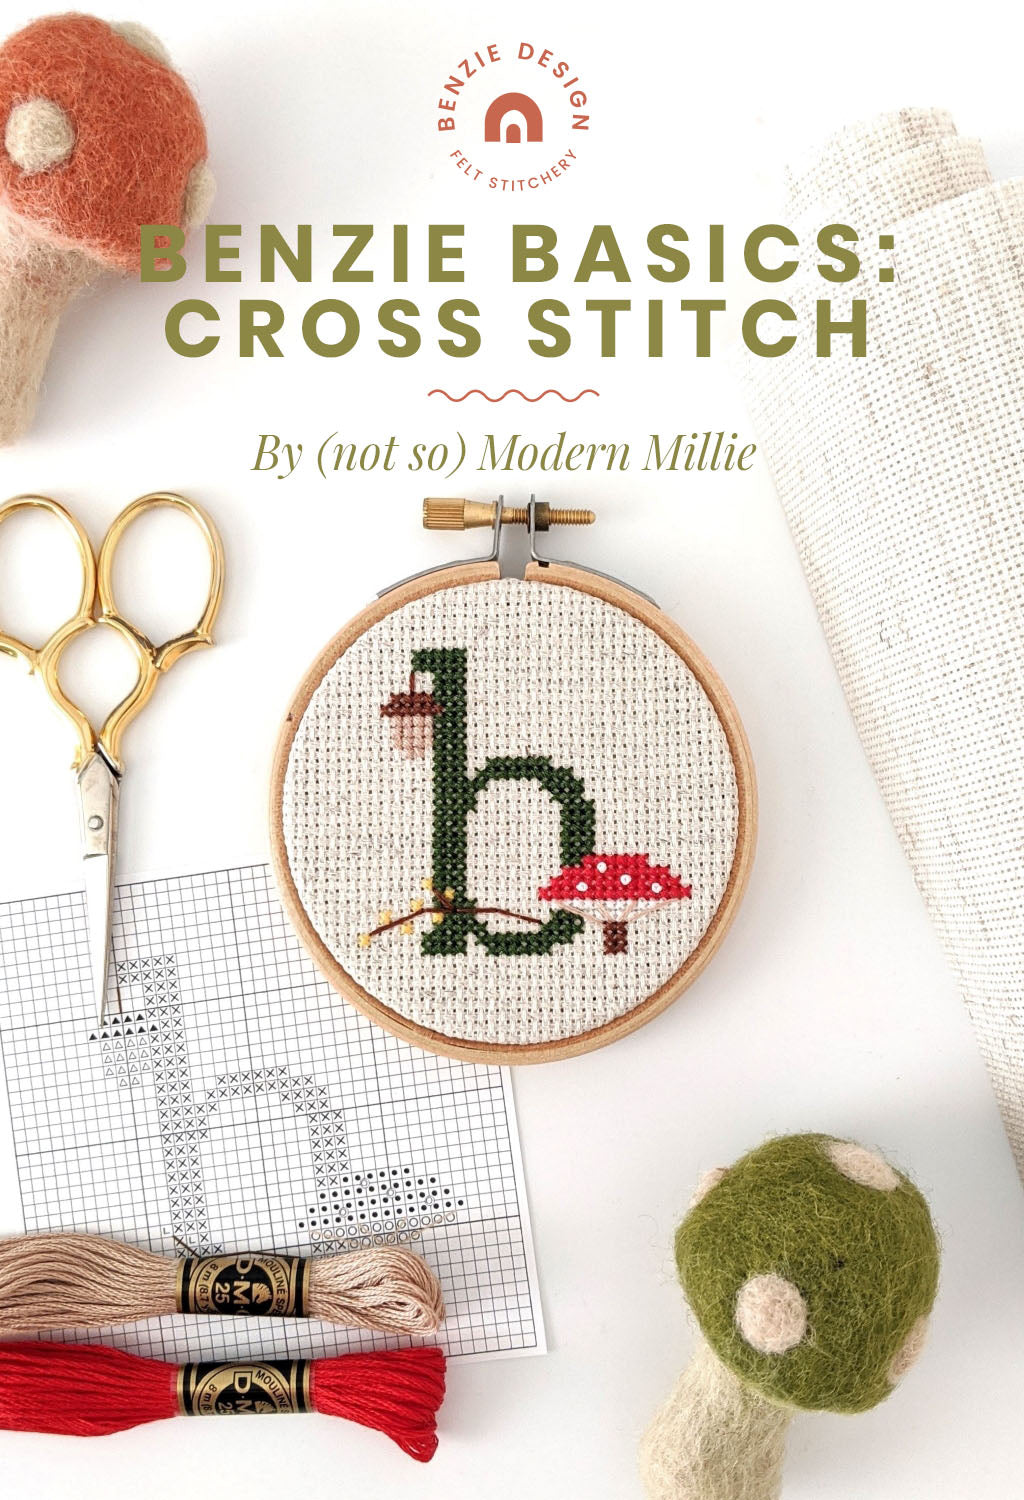 Cross Stitch Embroidery U-shaped Scissors with Cover Small Yarn